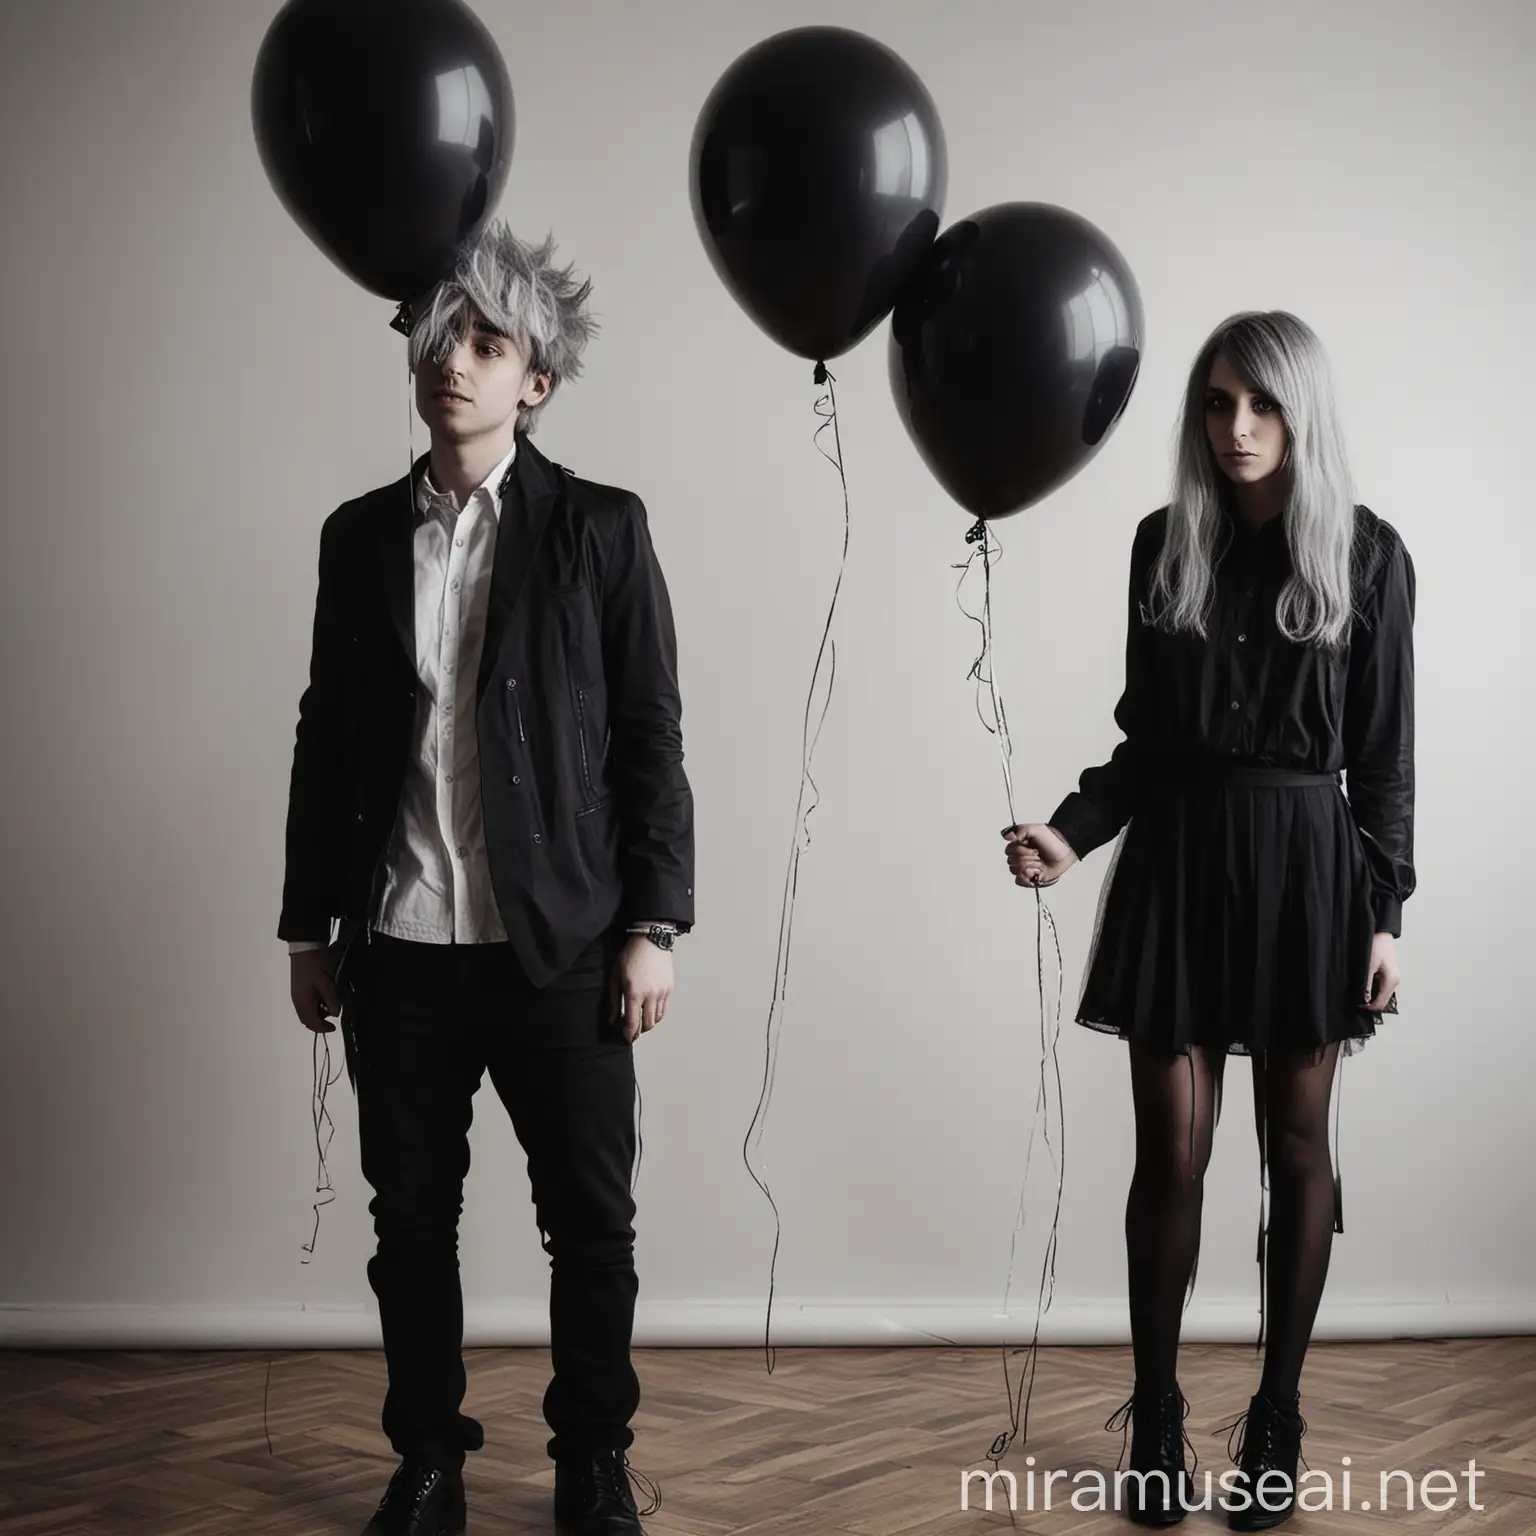 male and female, dark pop band, balloons
